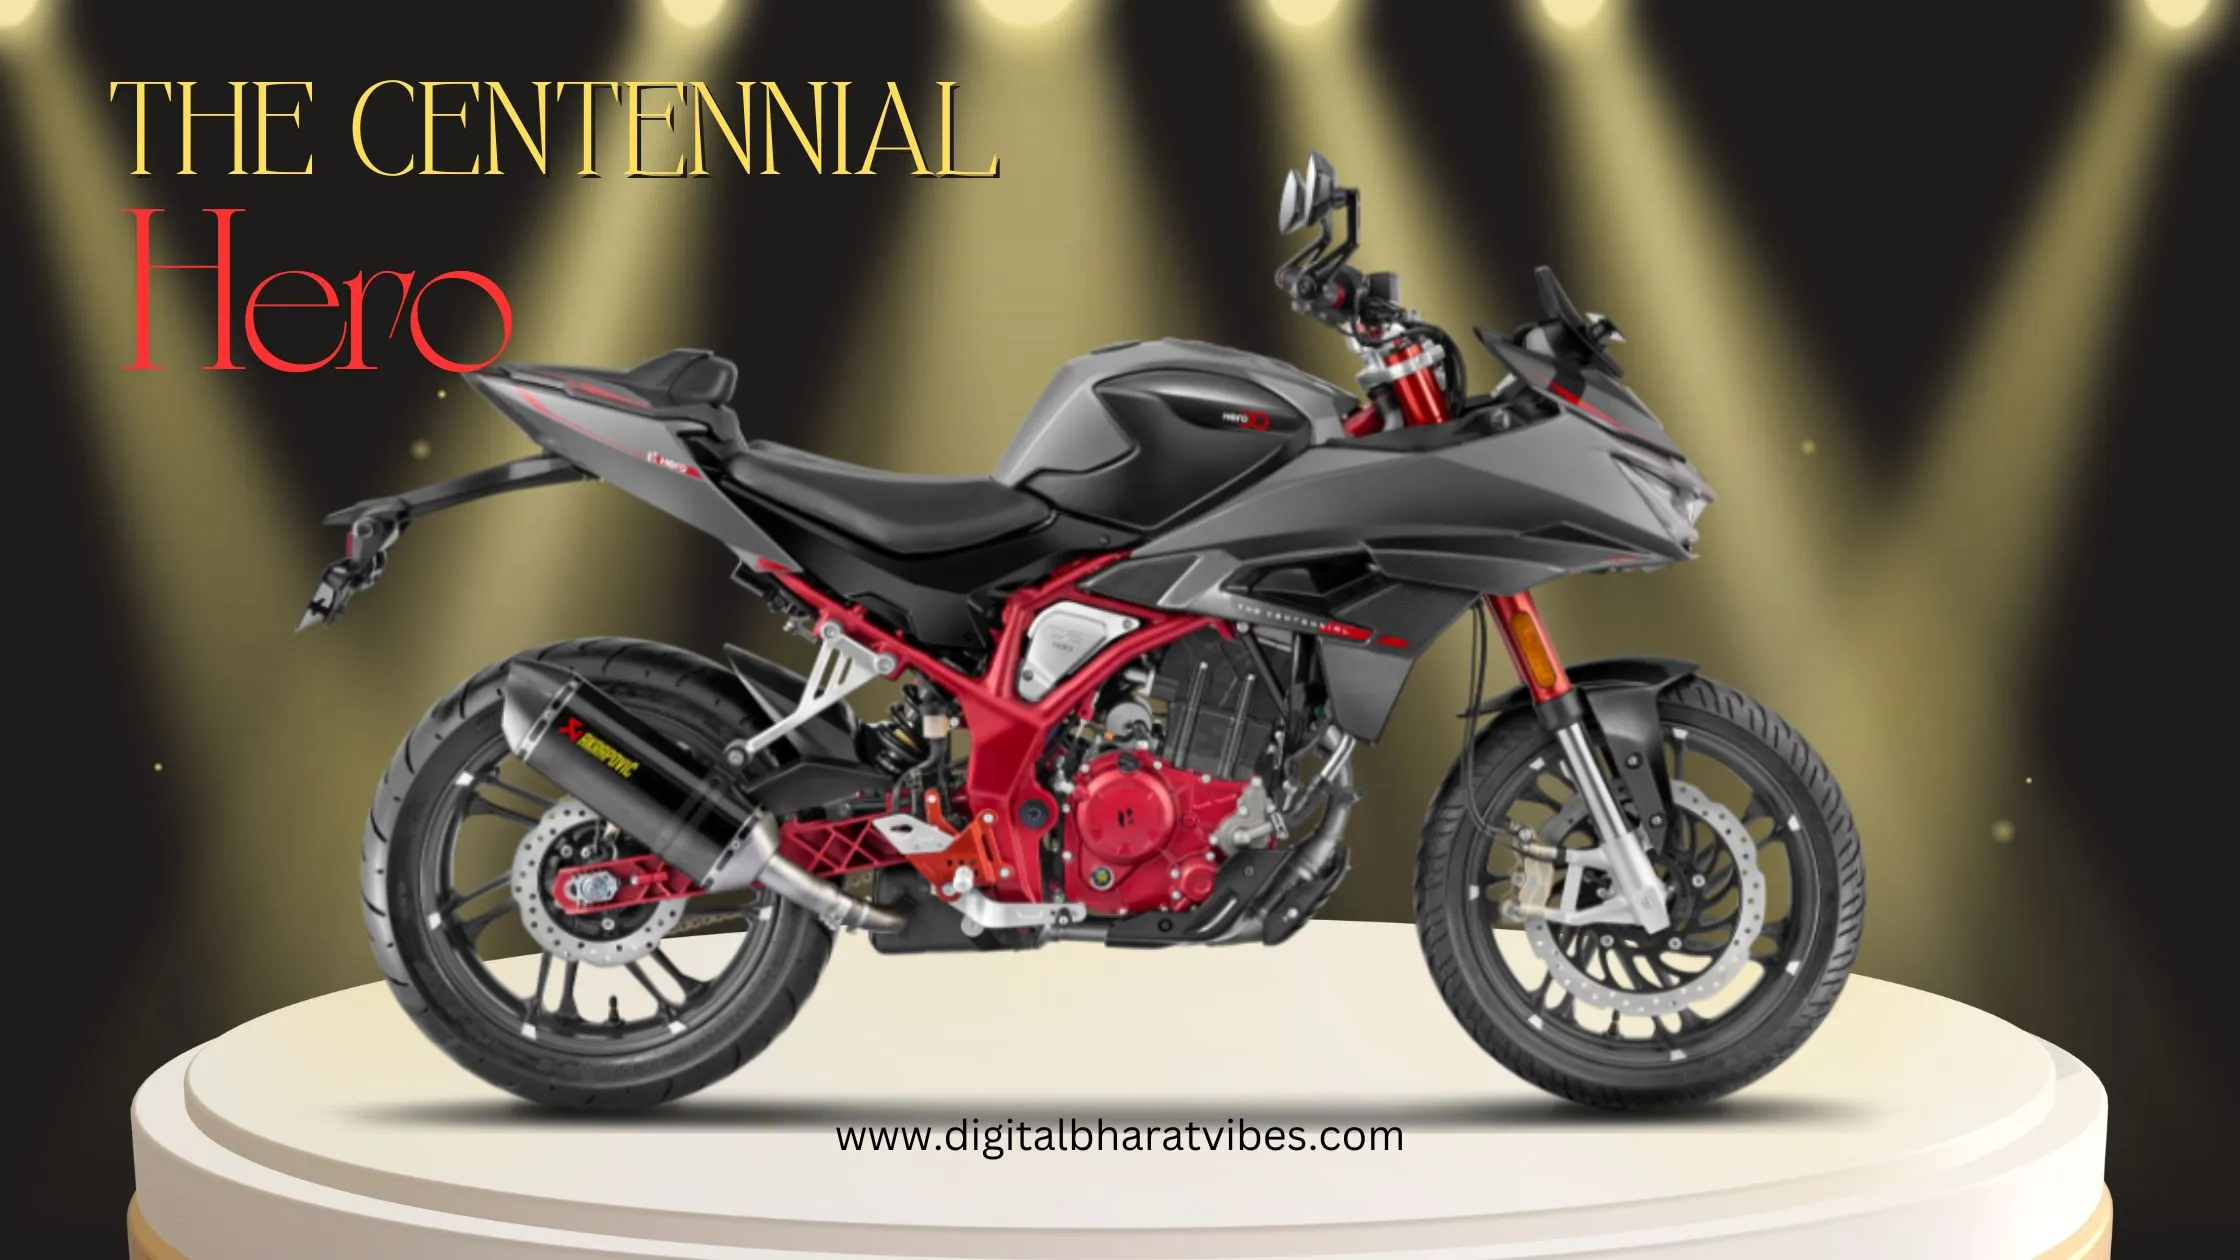 A black and red colored limited edition Hero MotoCorp motorcycle, "The Centennial", displayed on a white pedestal with text overlay "The Centennial" and "Hero MotoCorp" visible.